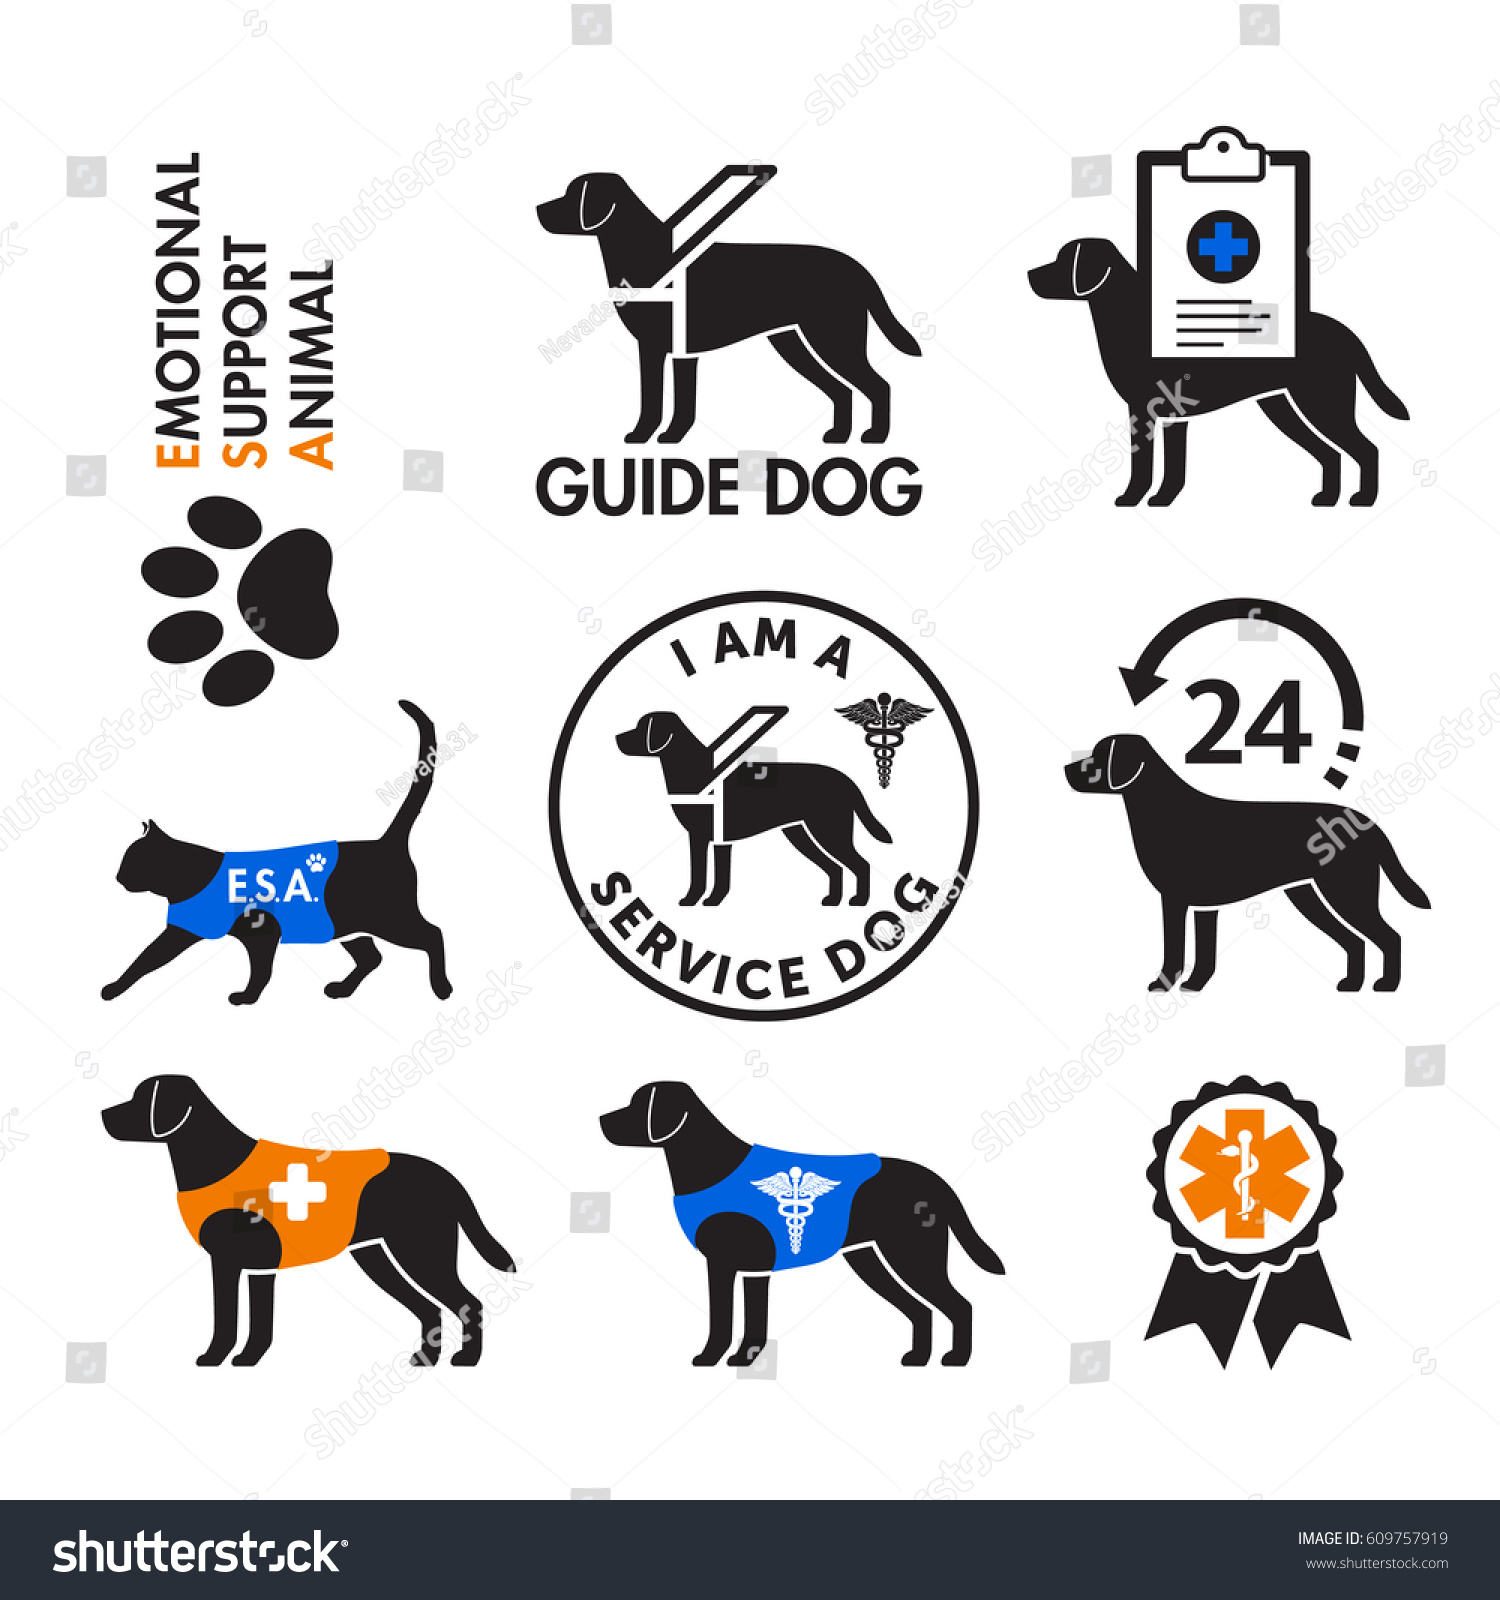 Service Dogs Emotional Support Animals Signs Stock Vector Royalty Free 609757919